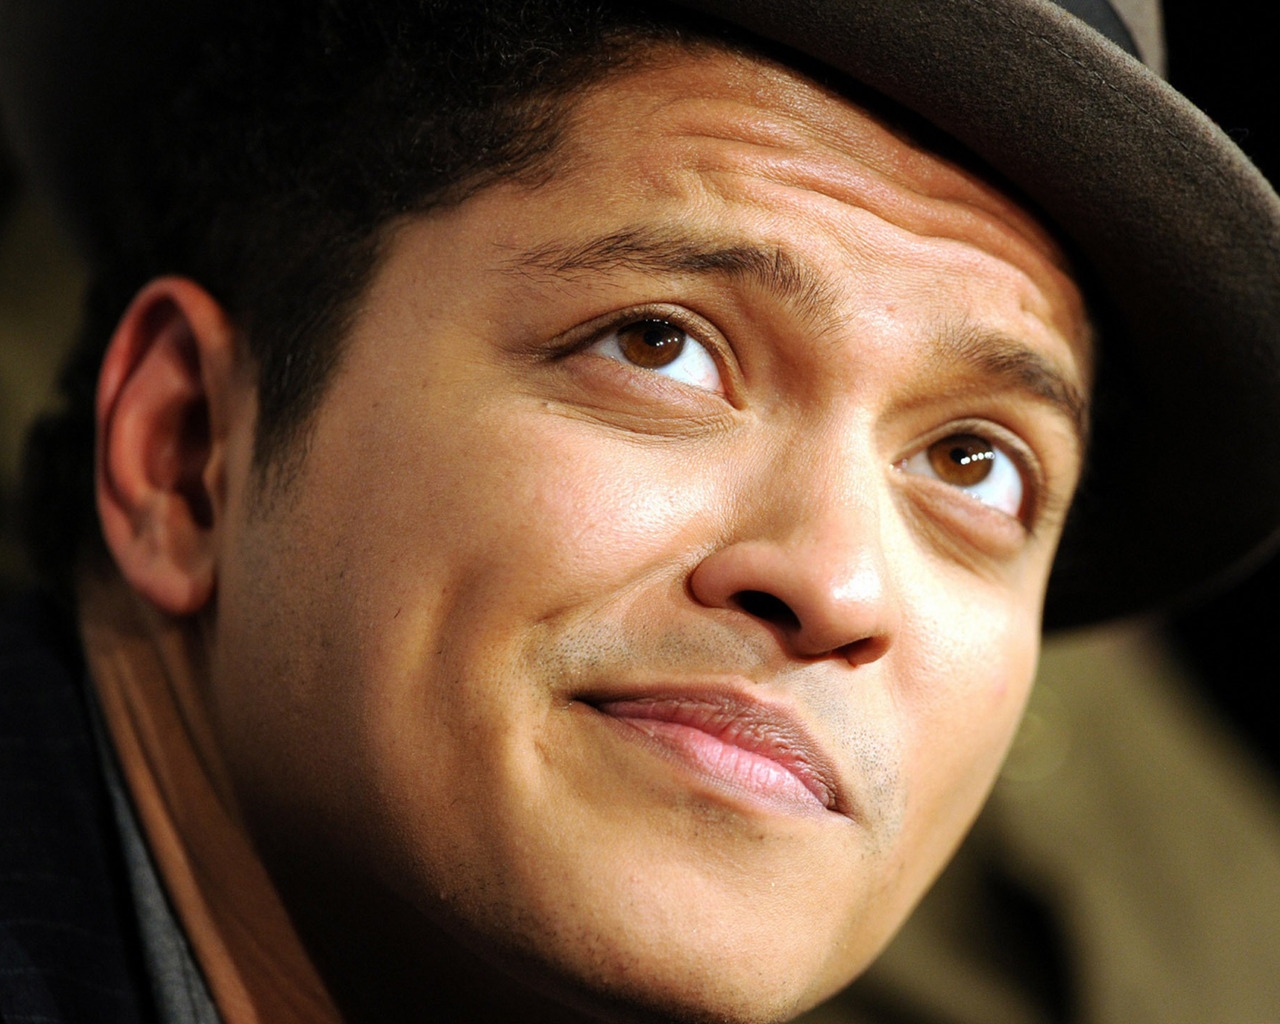 Bruno Mars Look for 1280 x 1024 resolution